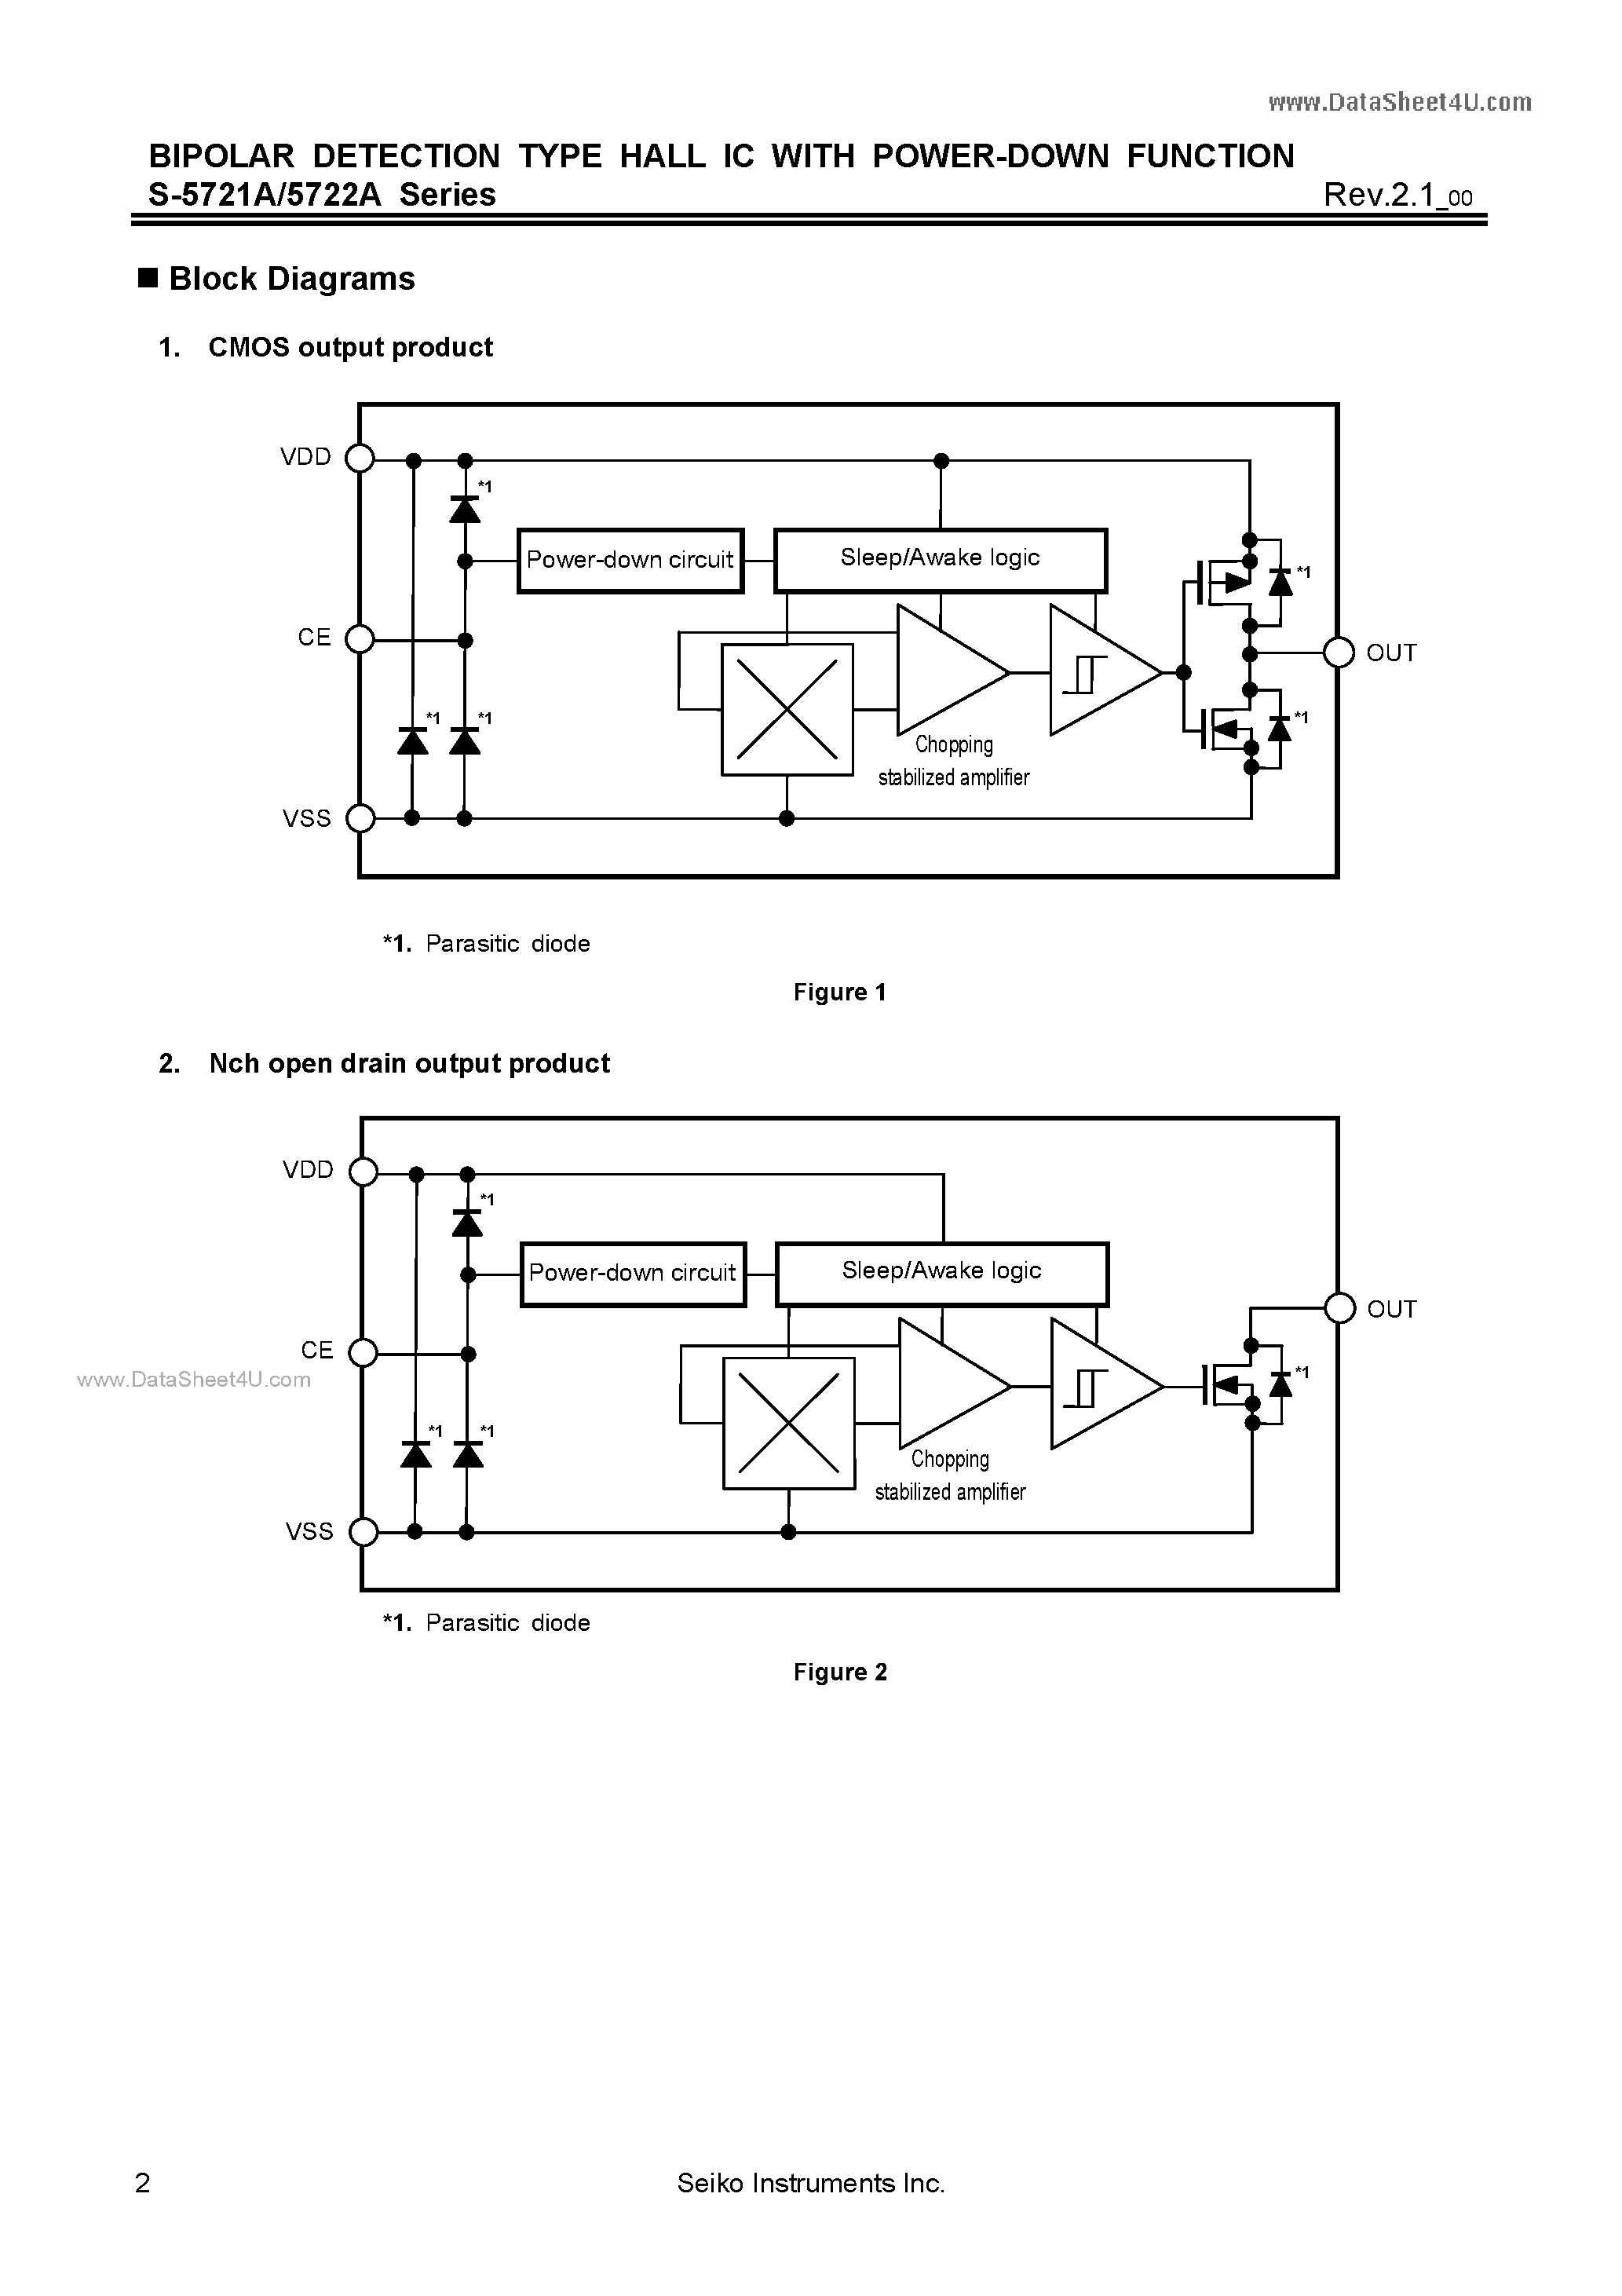 Datasheet S-5721A - (S-5721A / S-5722A) BIPOLAR DETECTION TYPE HALL IC page 2